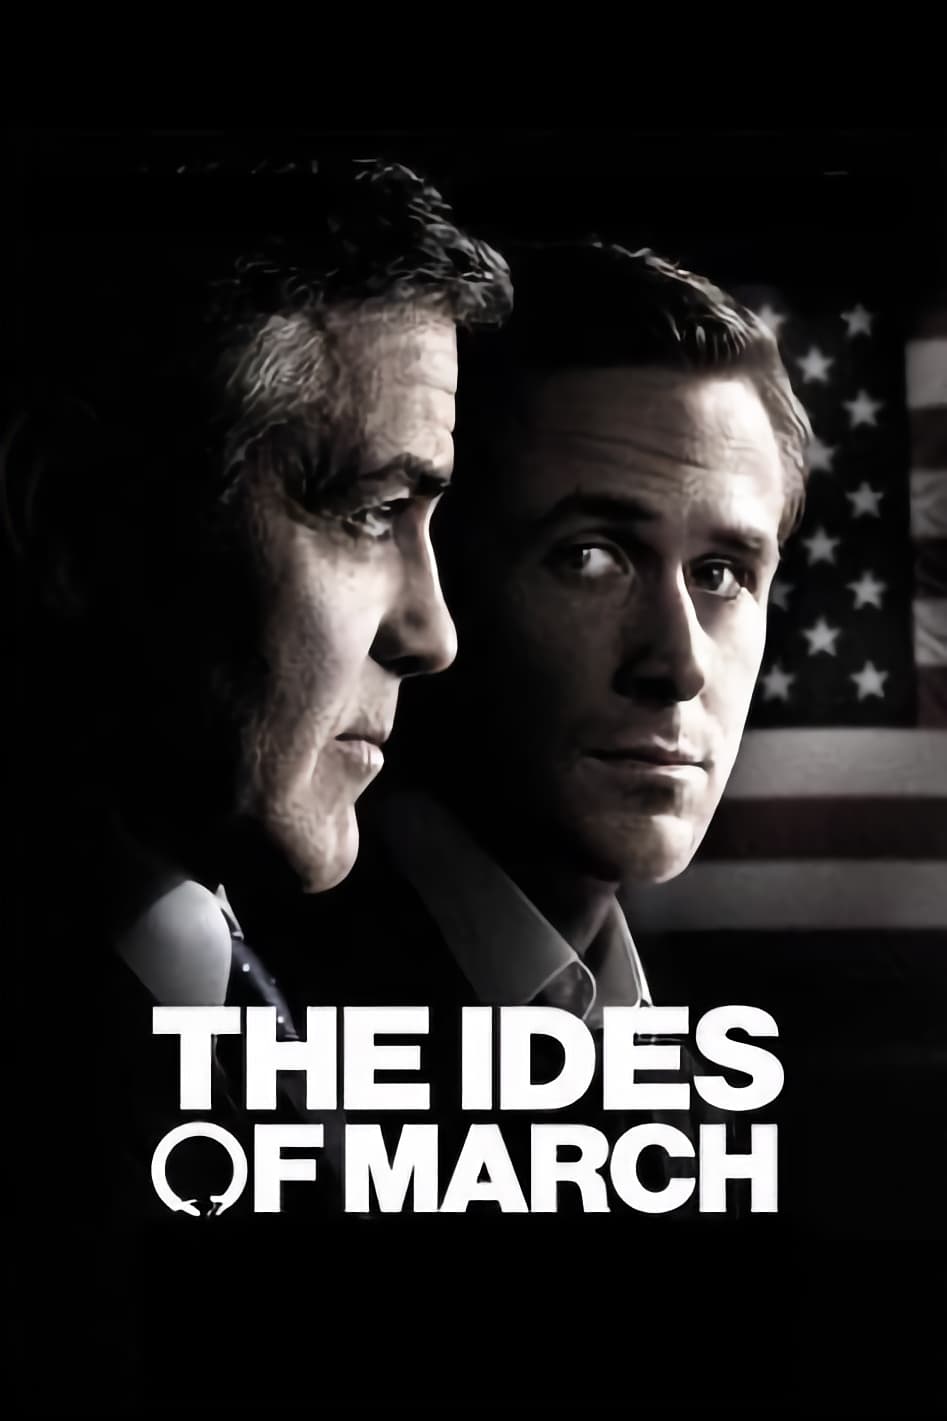 Ides of March